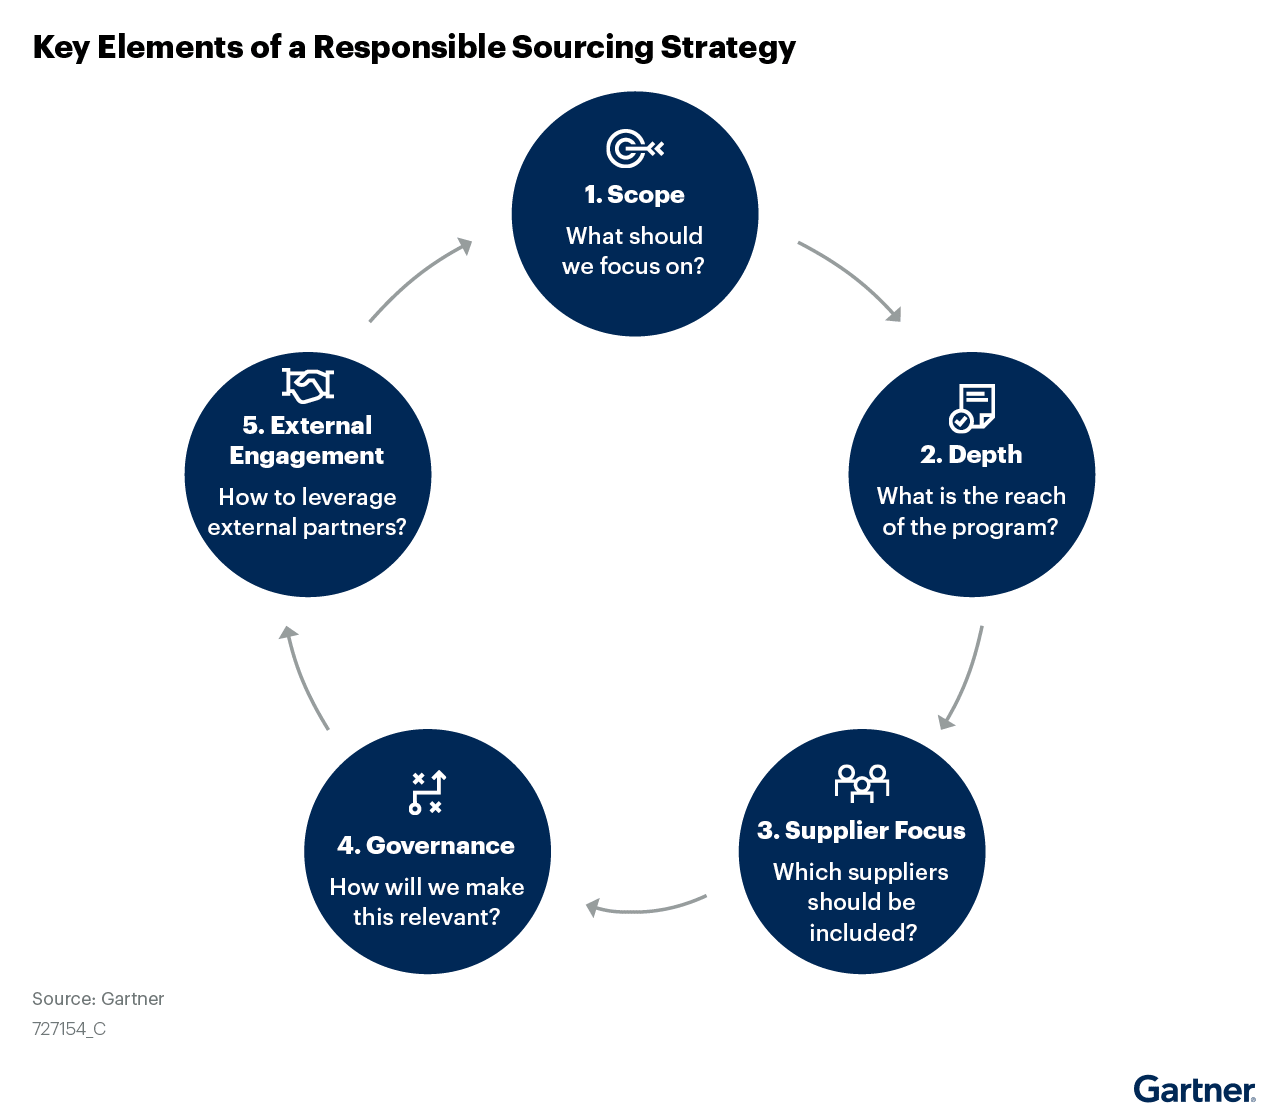 Key Elements of a Responsible Sourcing Strategy